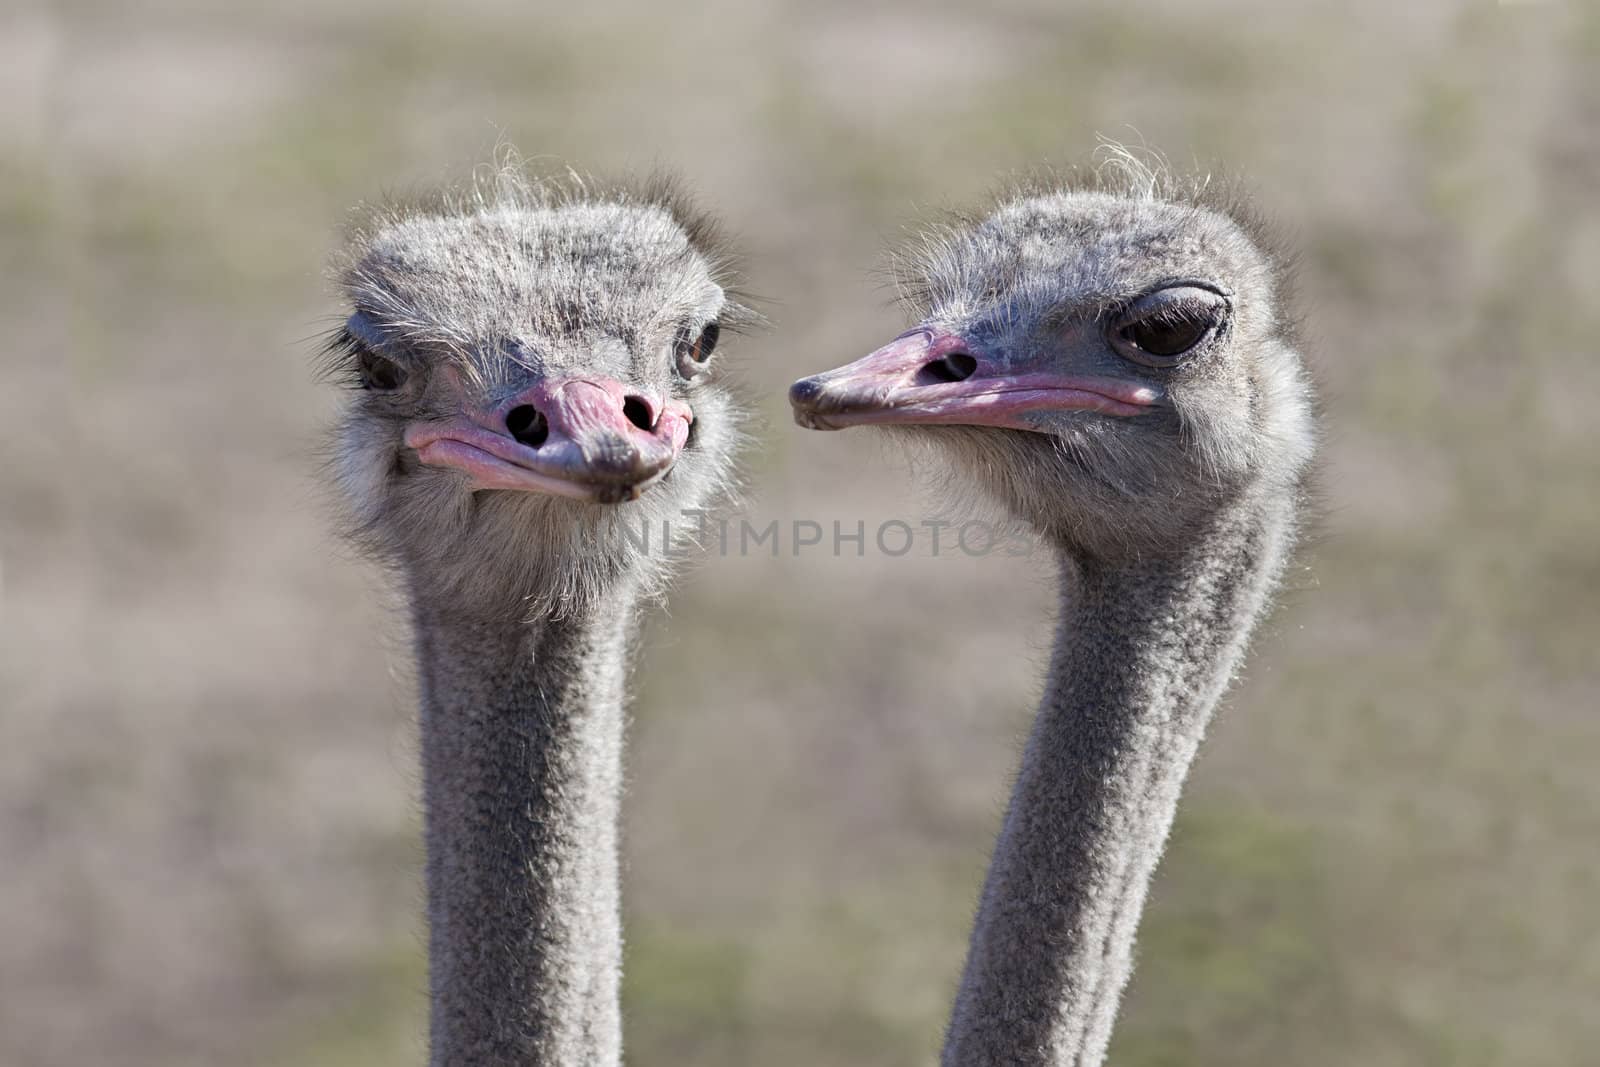 A close up shot of two ostriches (Struthio camelus) that appear to be having a conversation with each other.